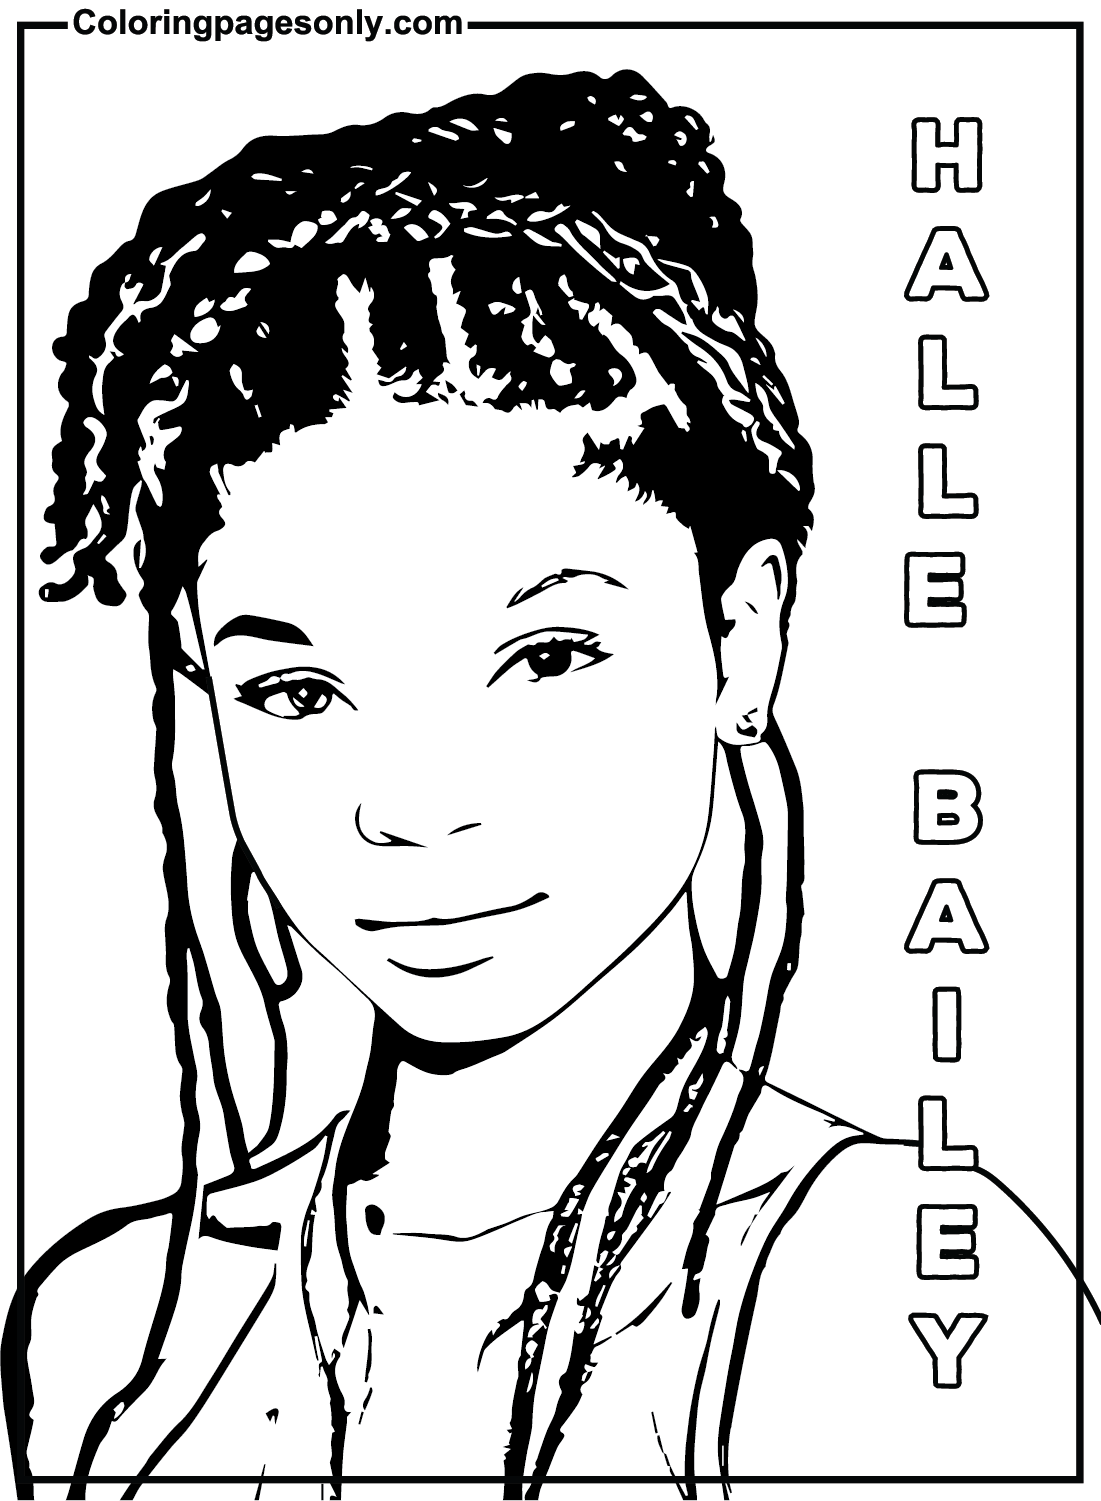 Halle Bailey Printable Coloring Pages